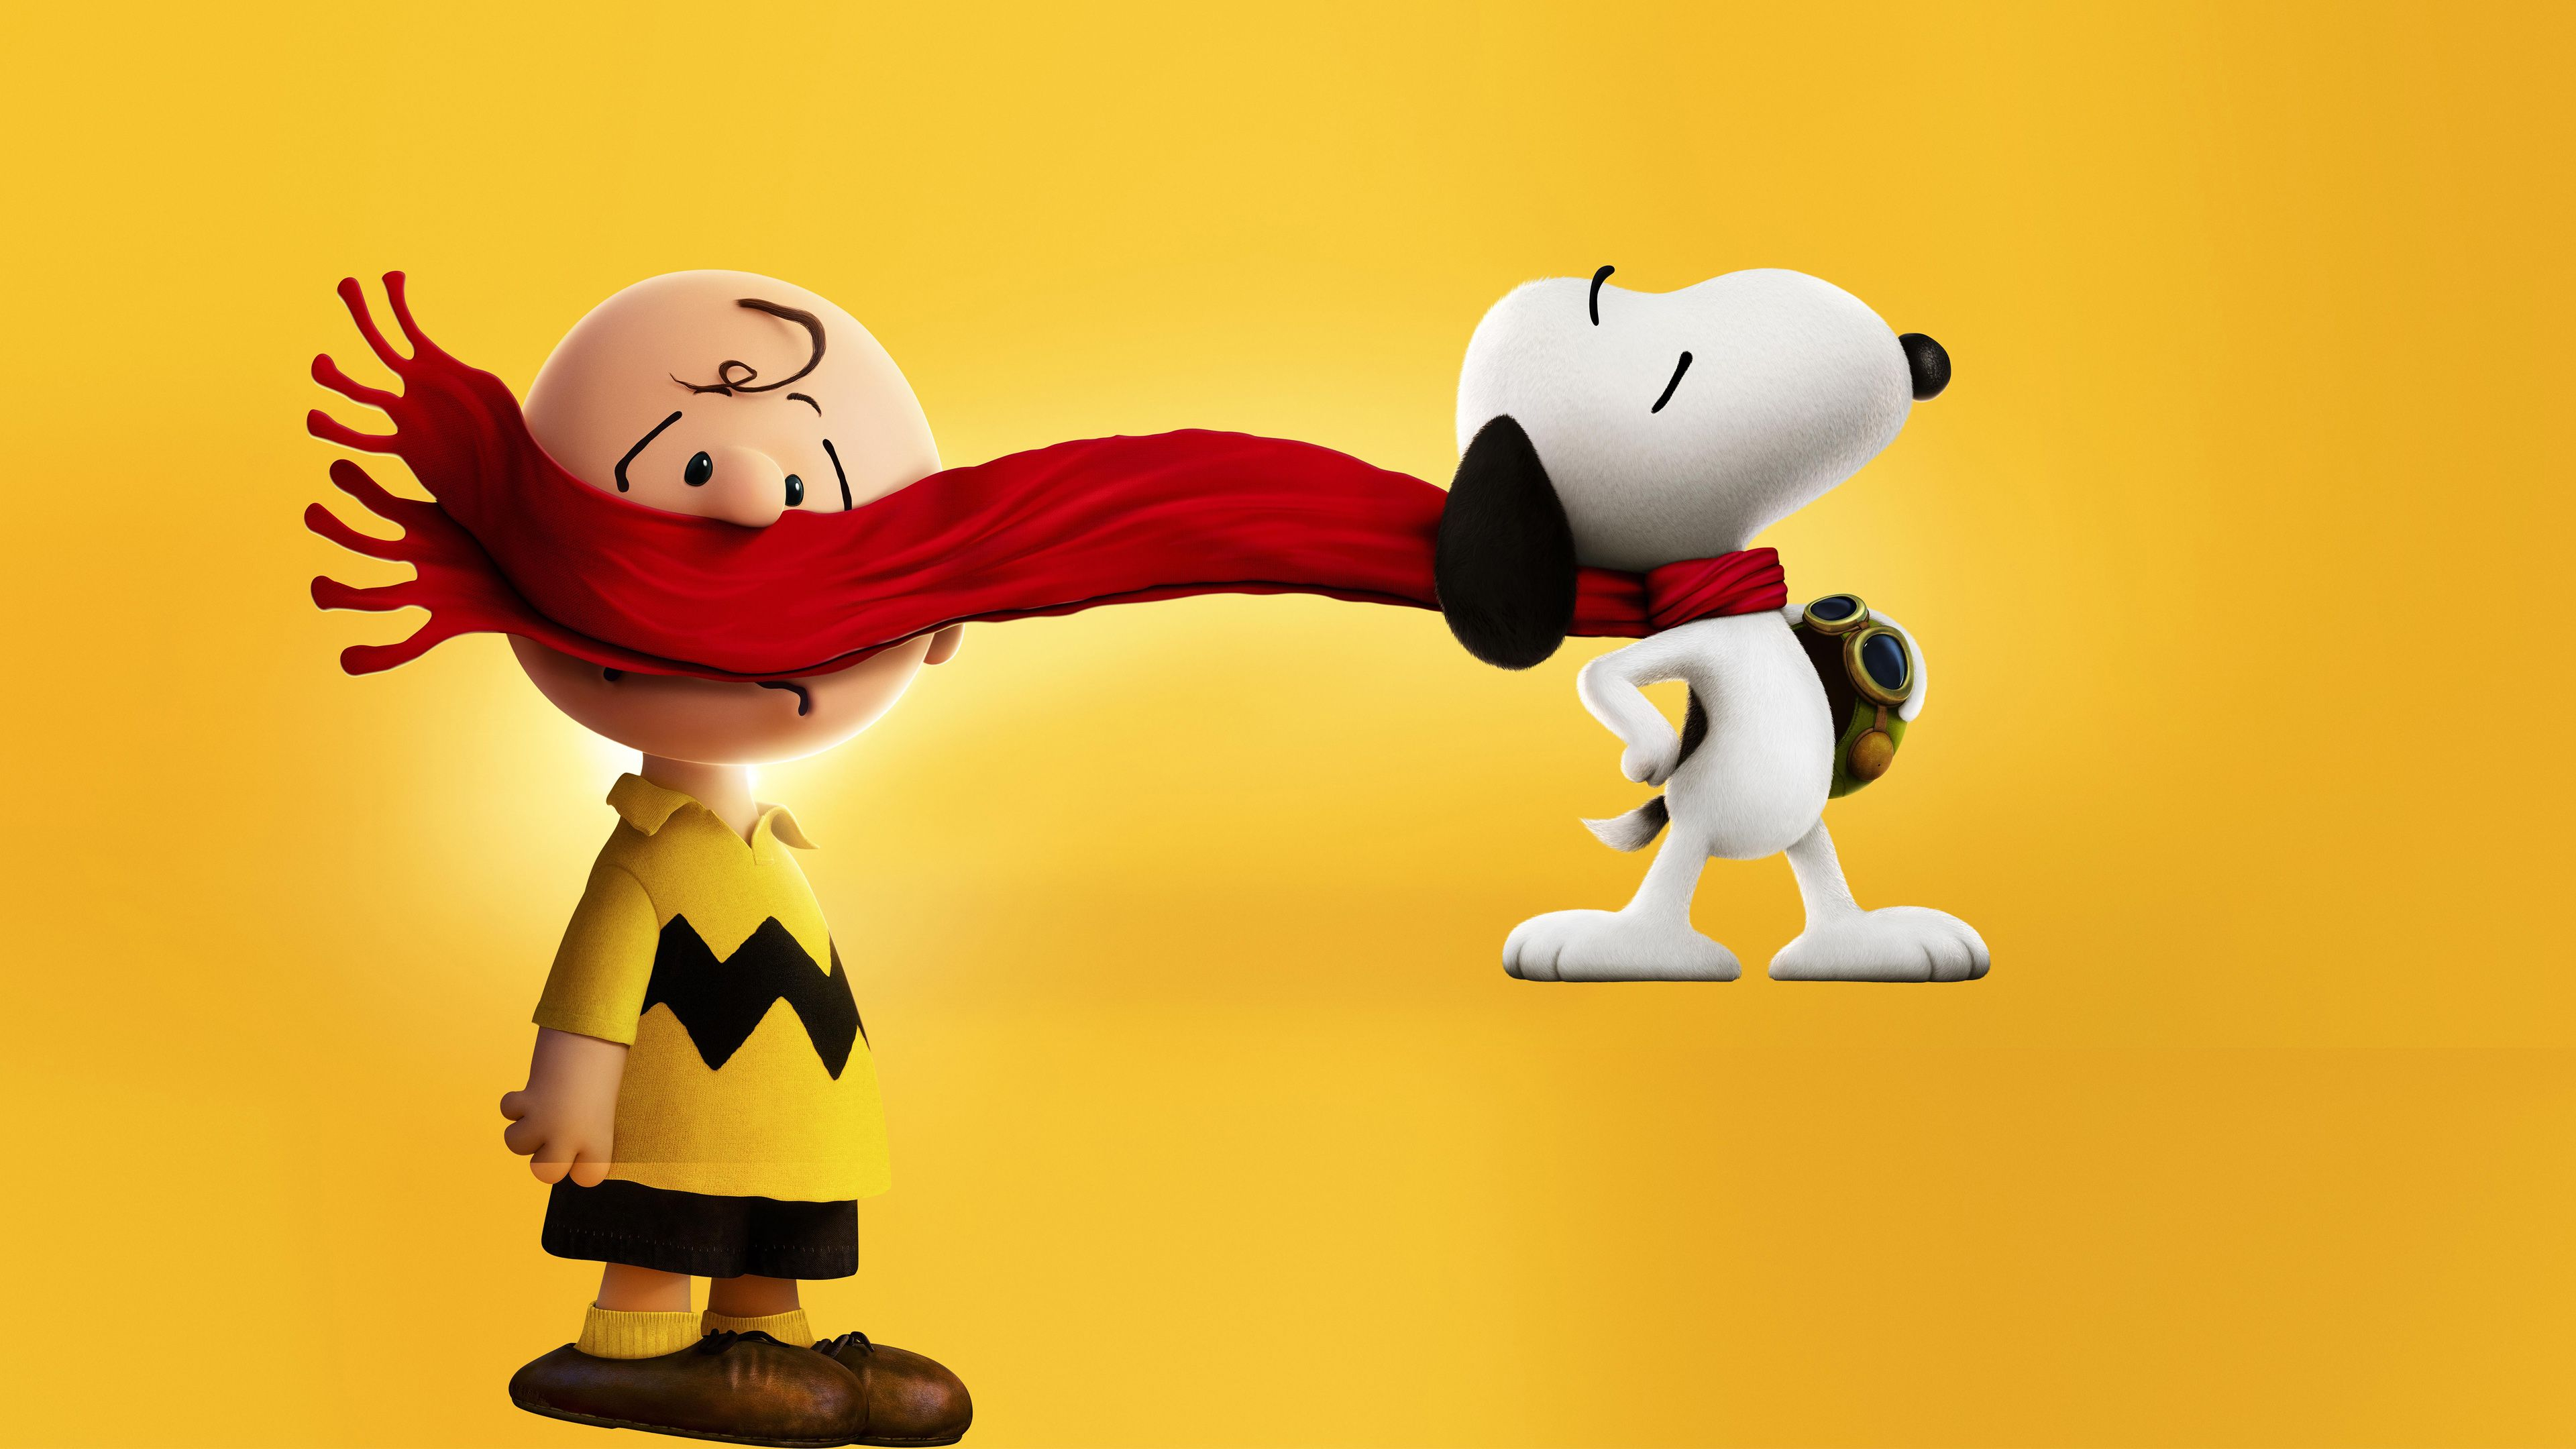 3840x2160 Peanuts Movie Wallpapers Top Free Peanuts Movie Backgrounds